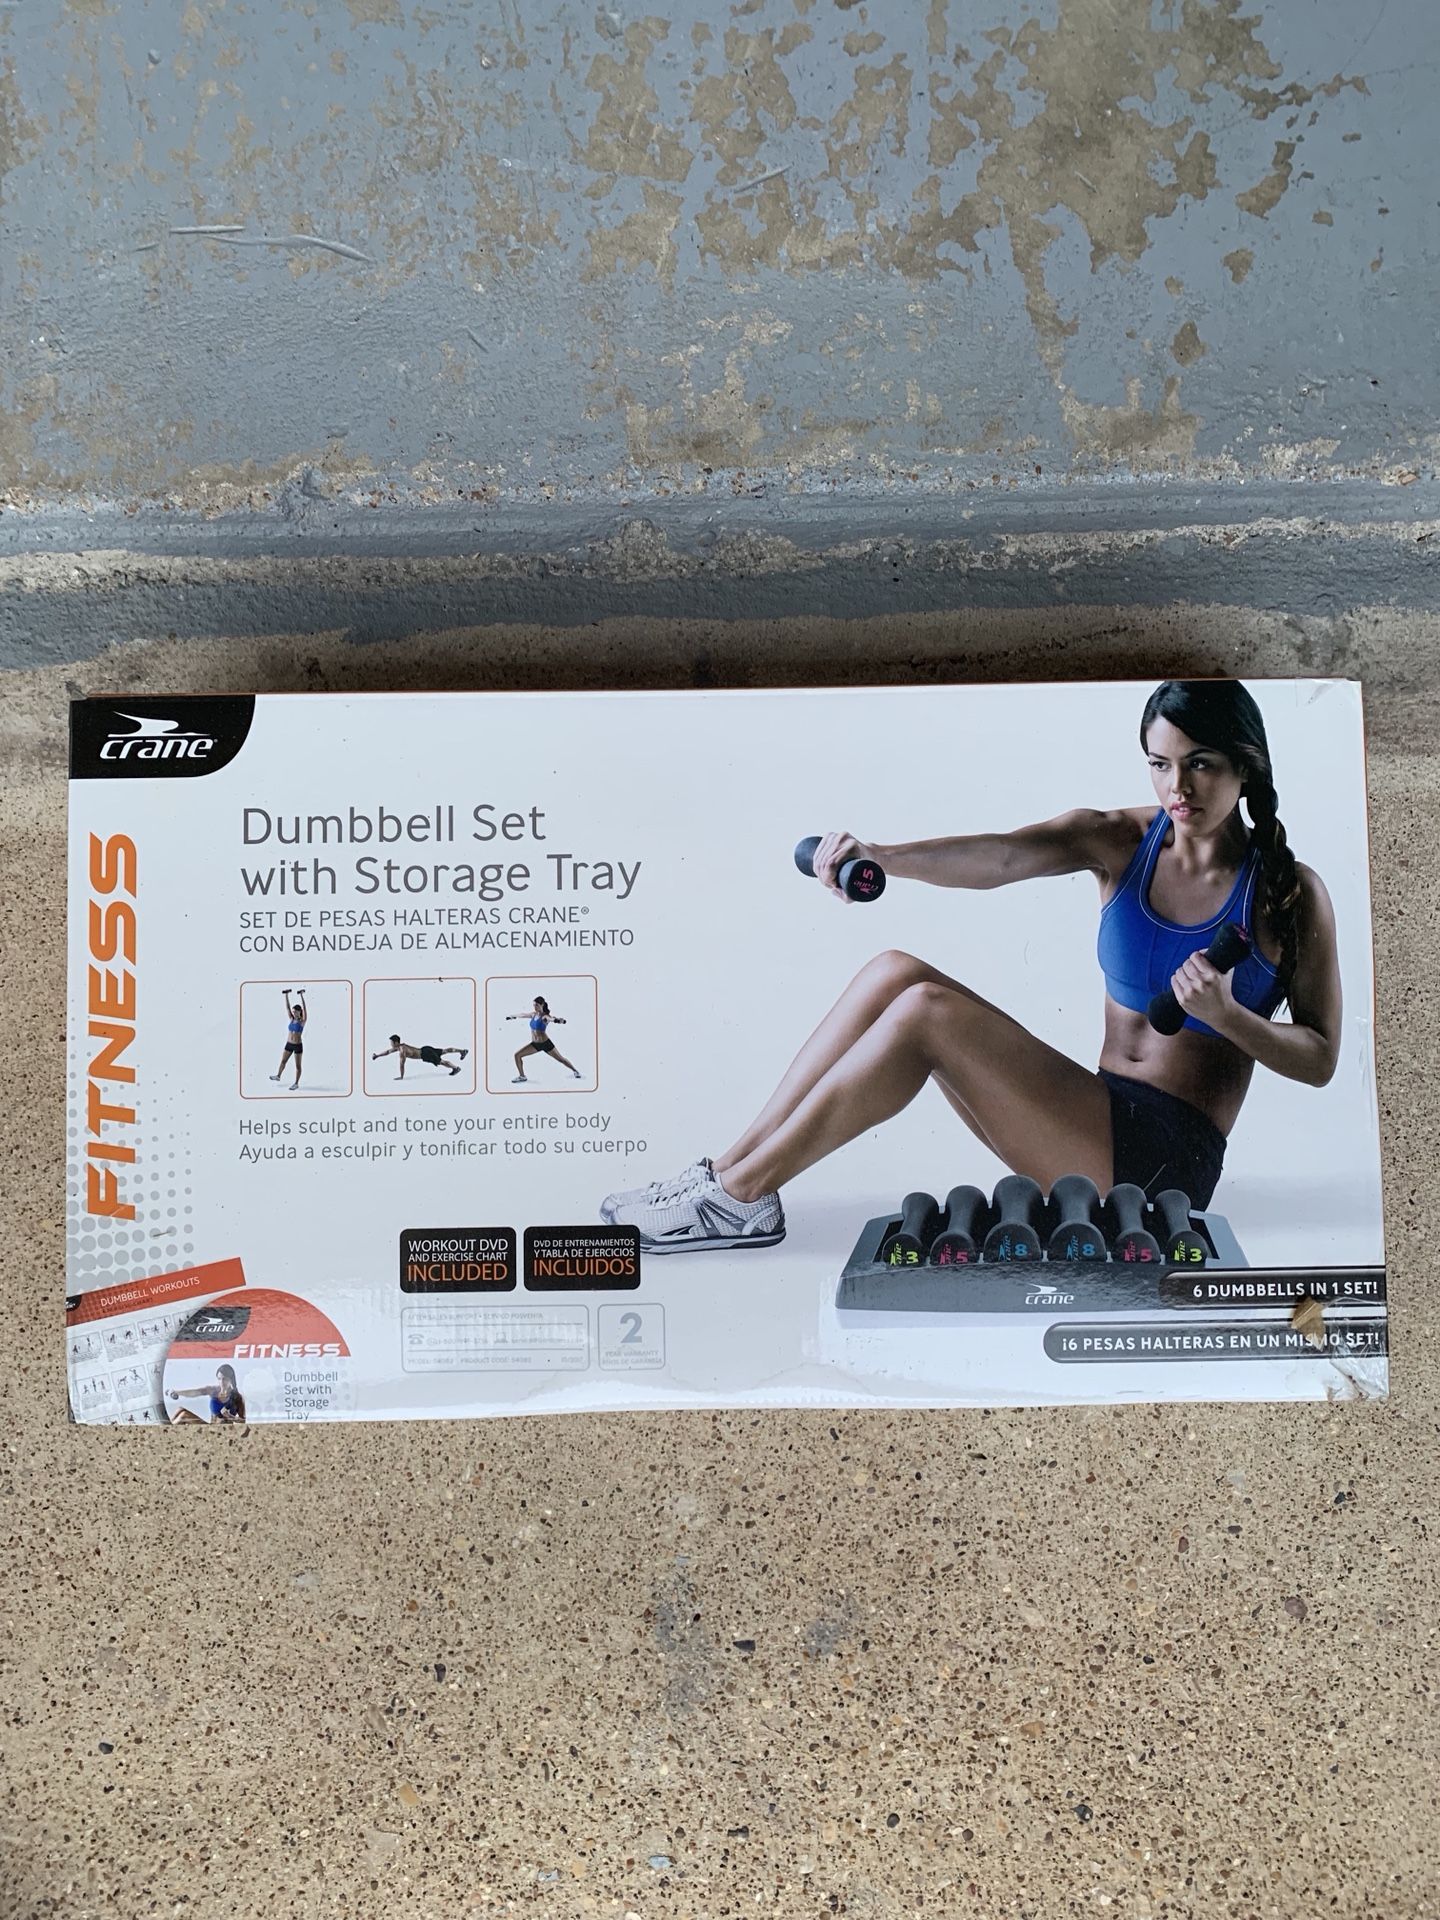 Dumbbell Set with Storage Tray